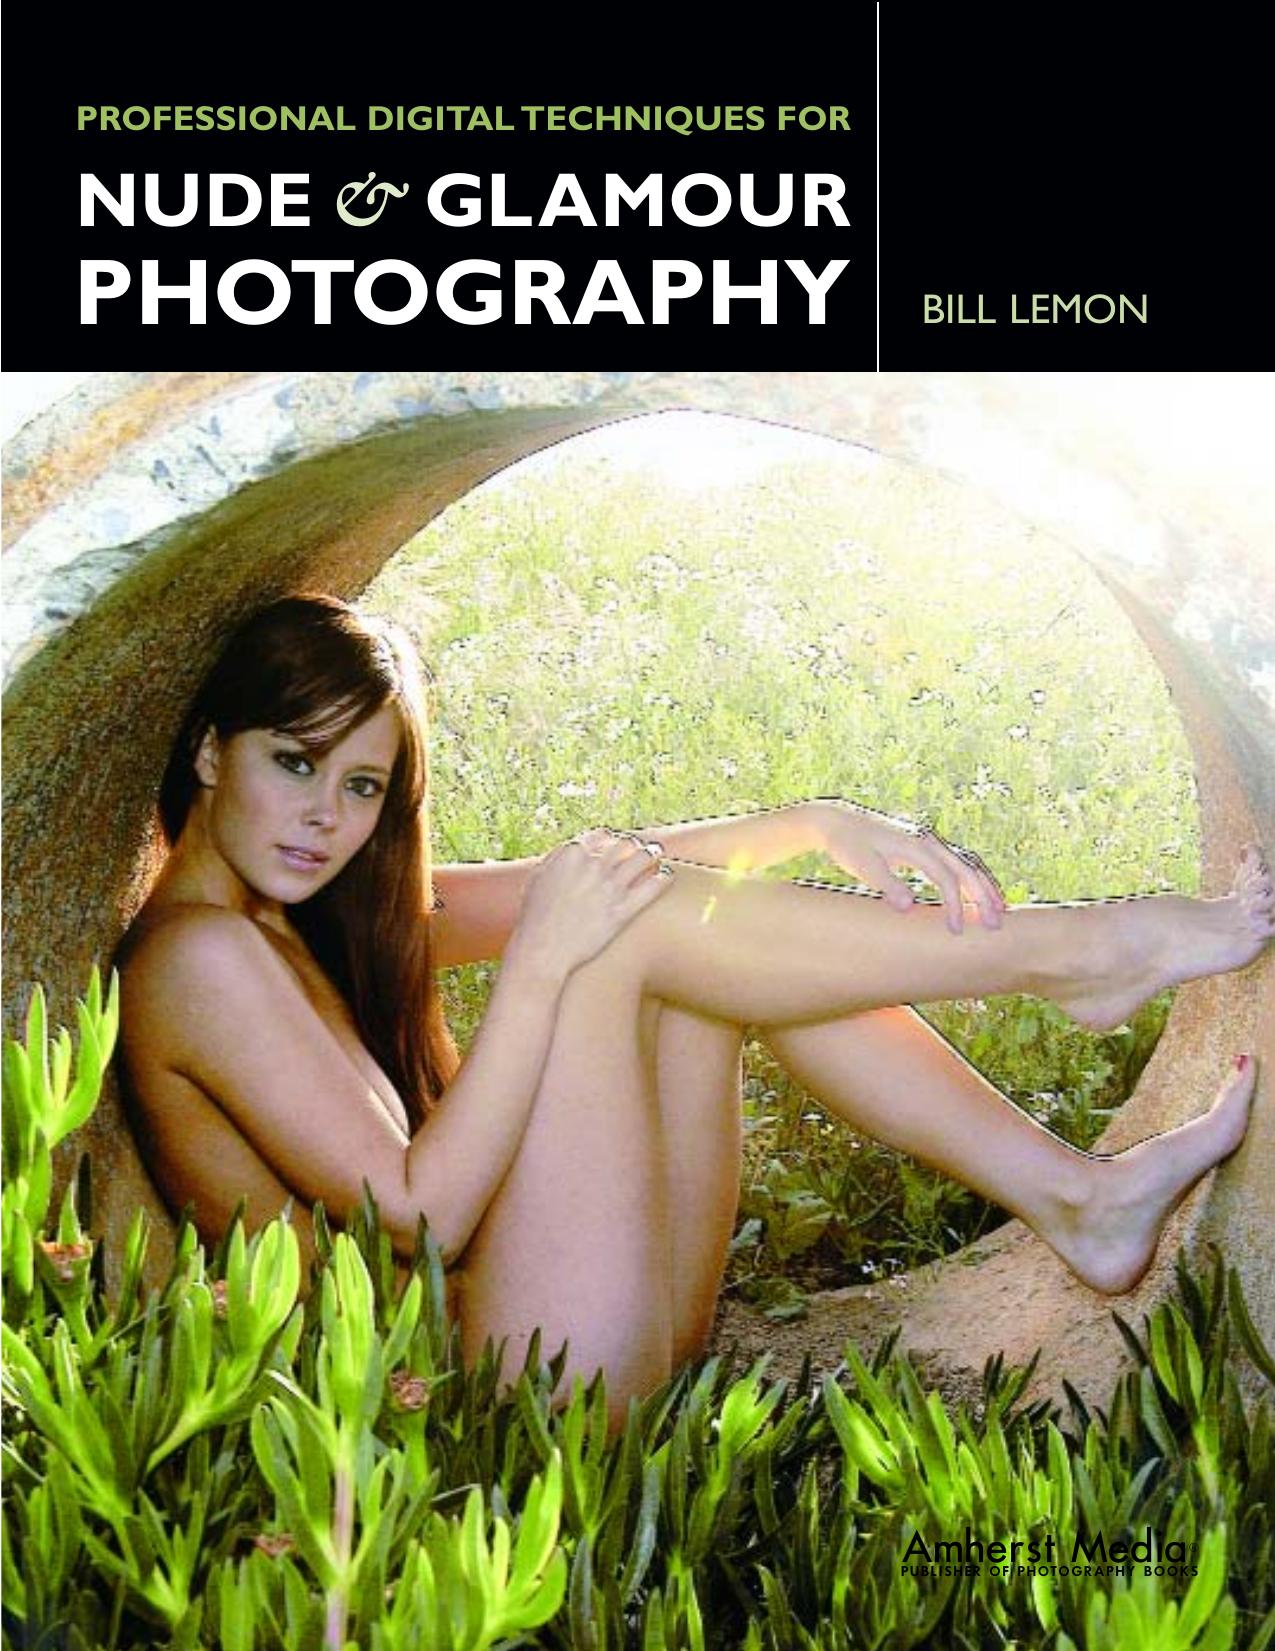 Professional Digital Techniques for Nude & Glamour Photography by Bill Lemon